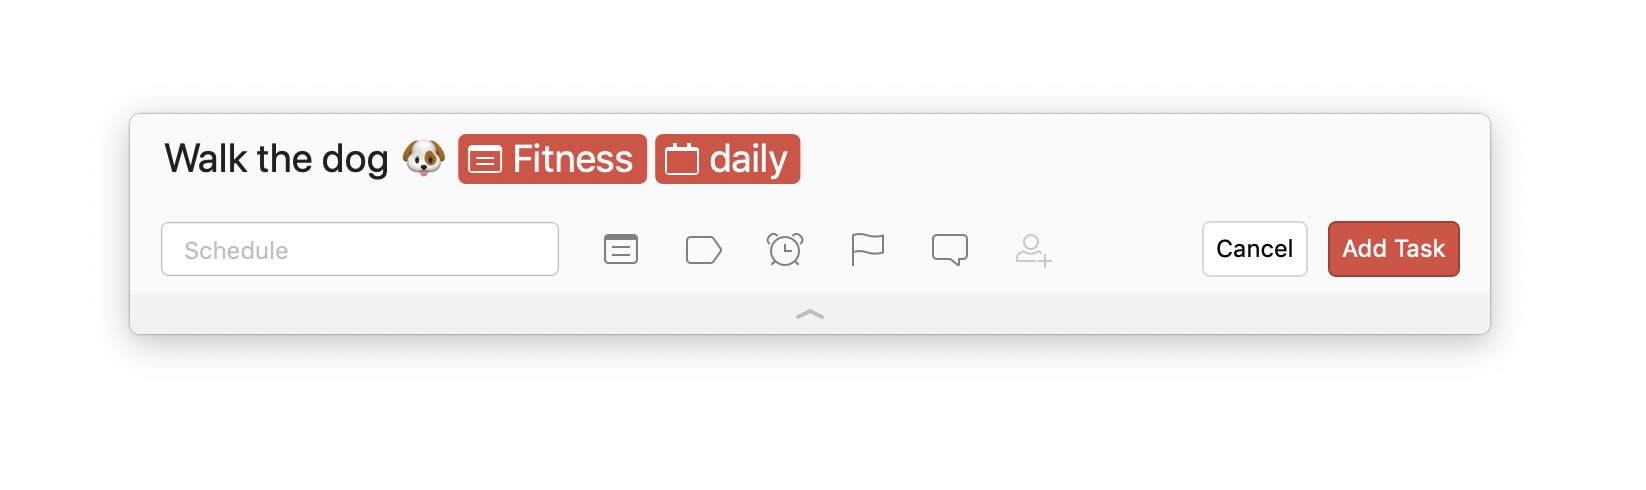 Set a recurring task in Todoist for physical activity